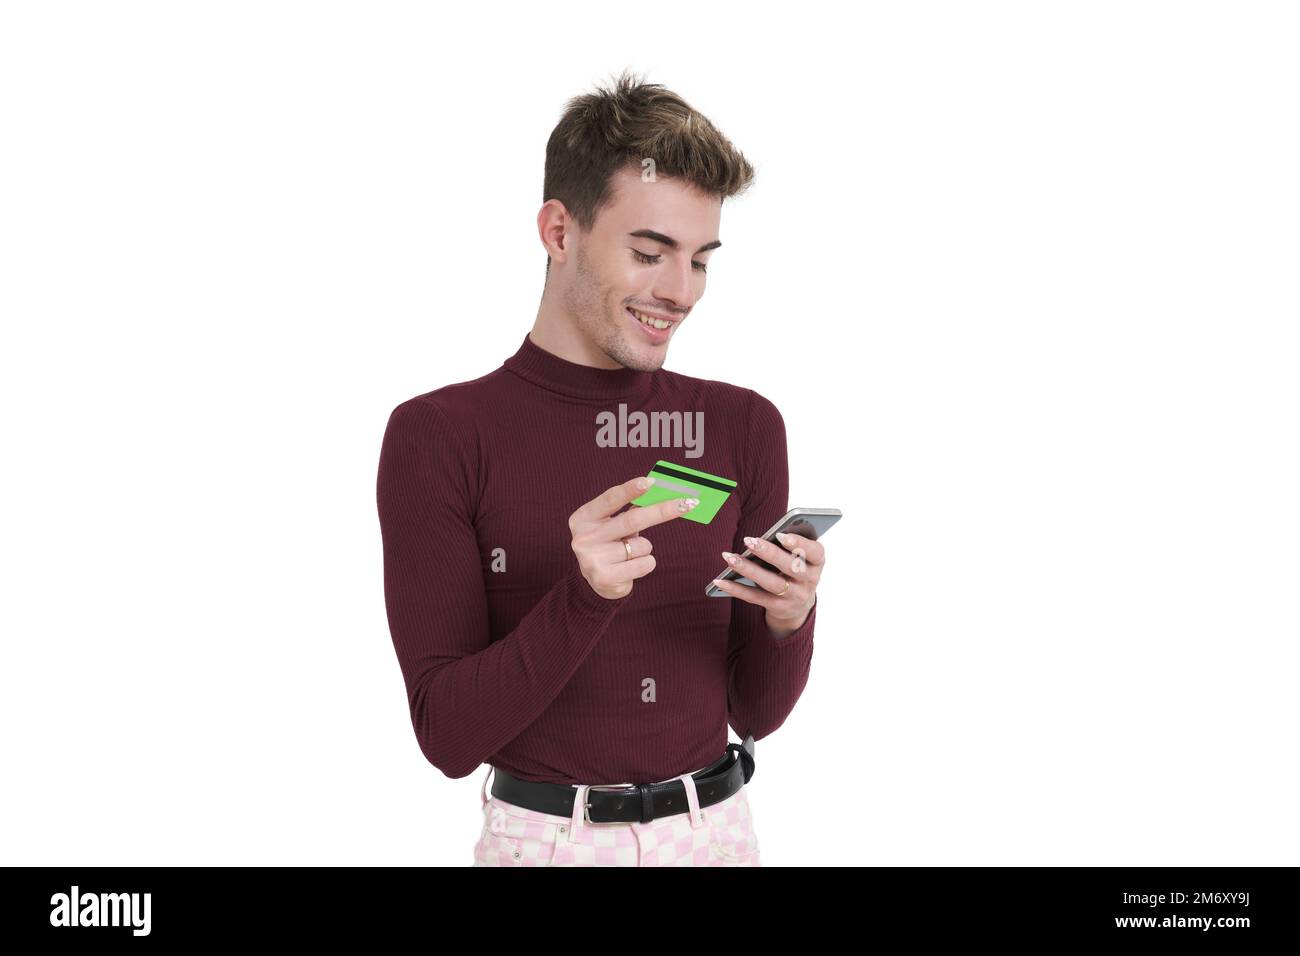 Young caucasian man smile buying online using the phone, isolated. Stock Photo